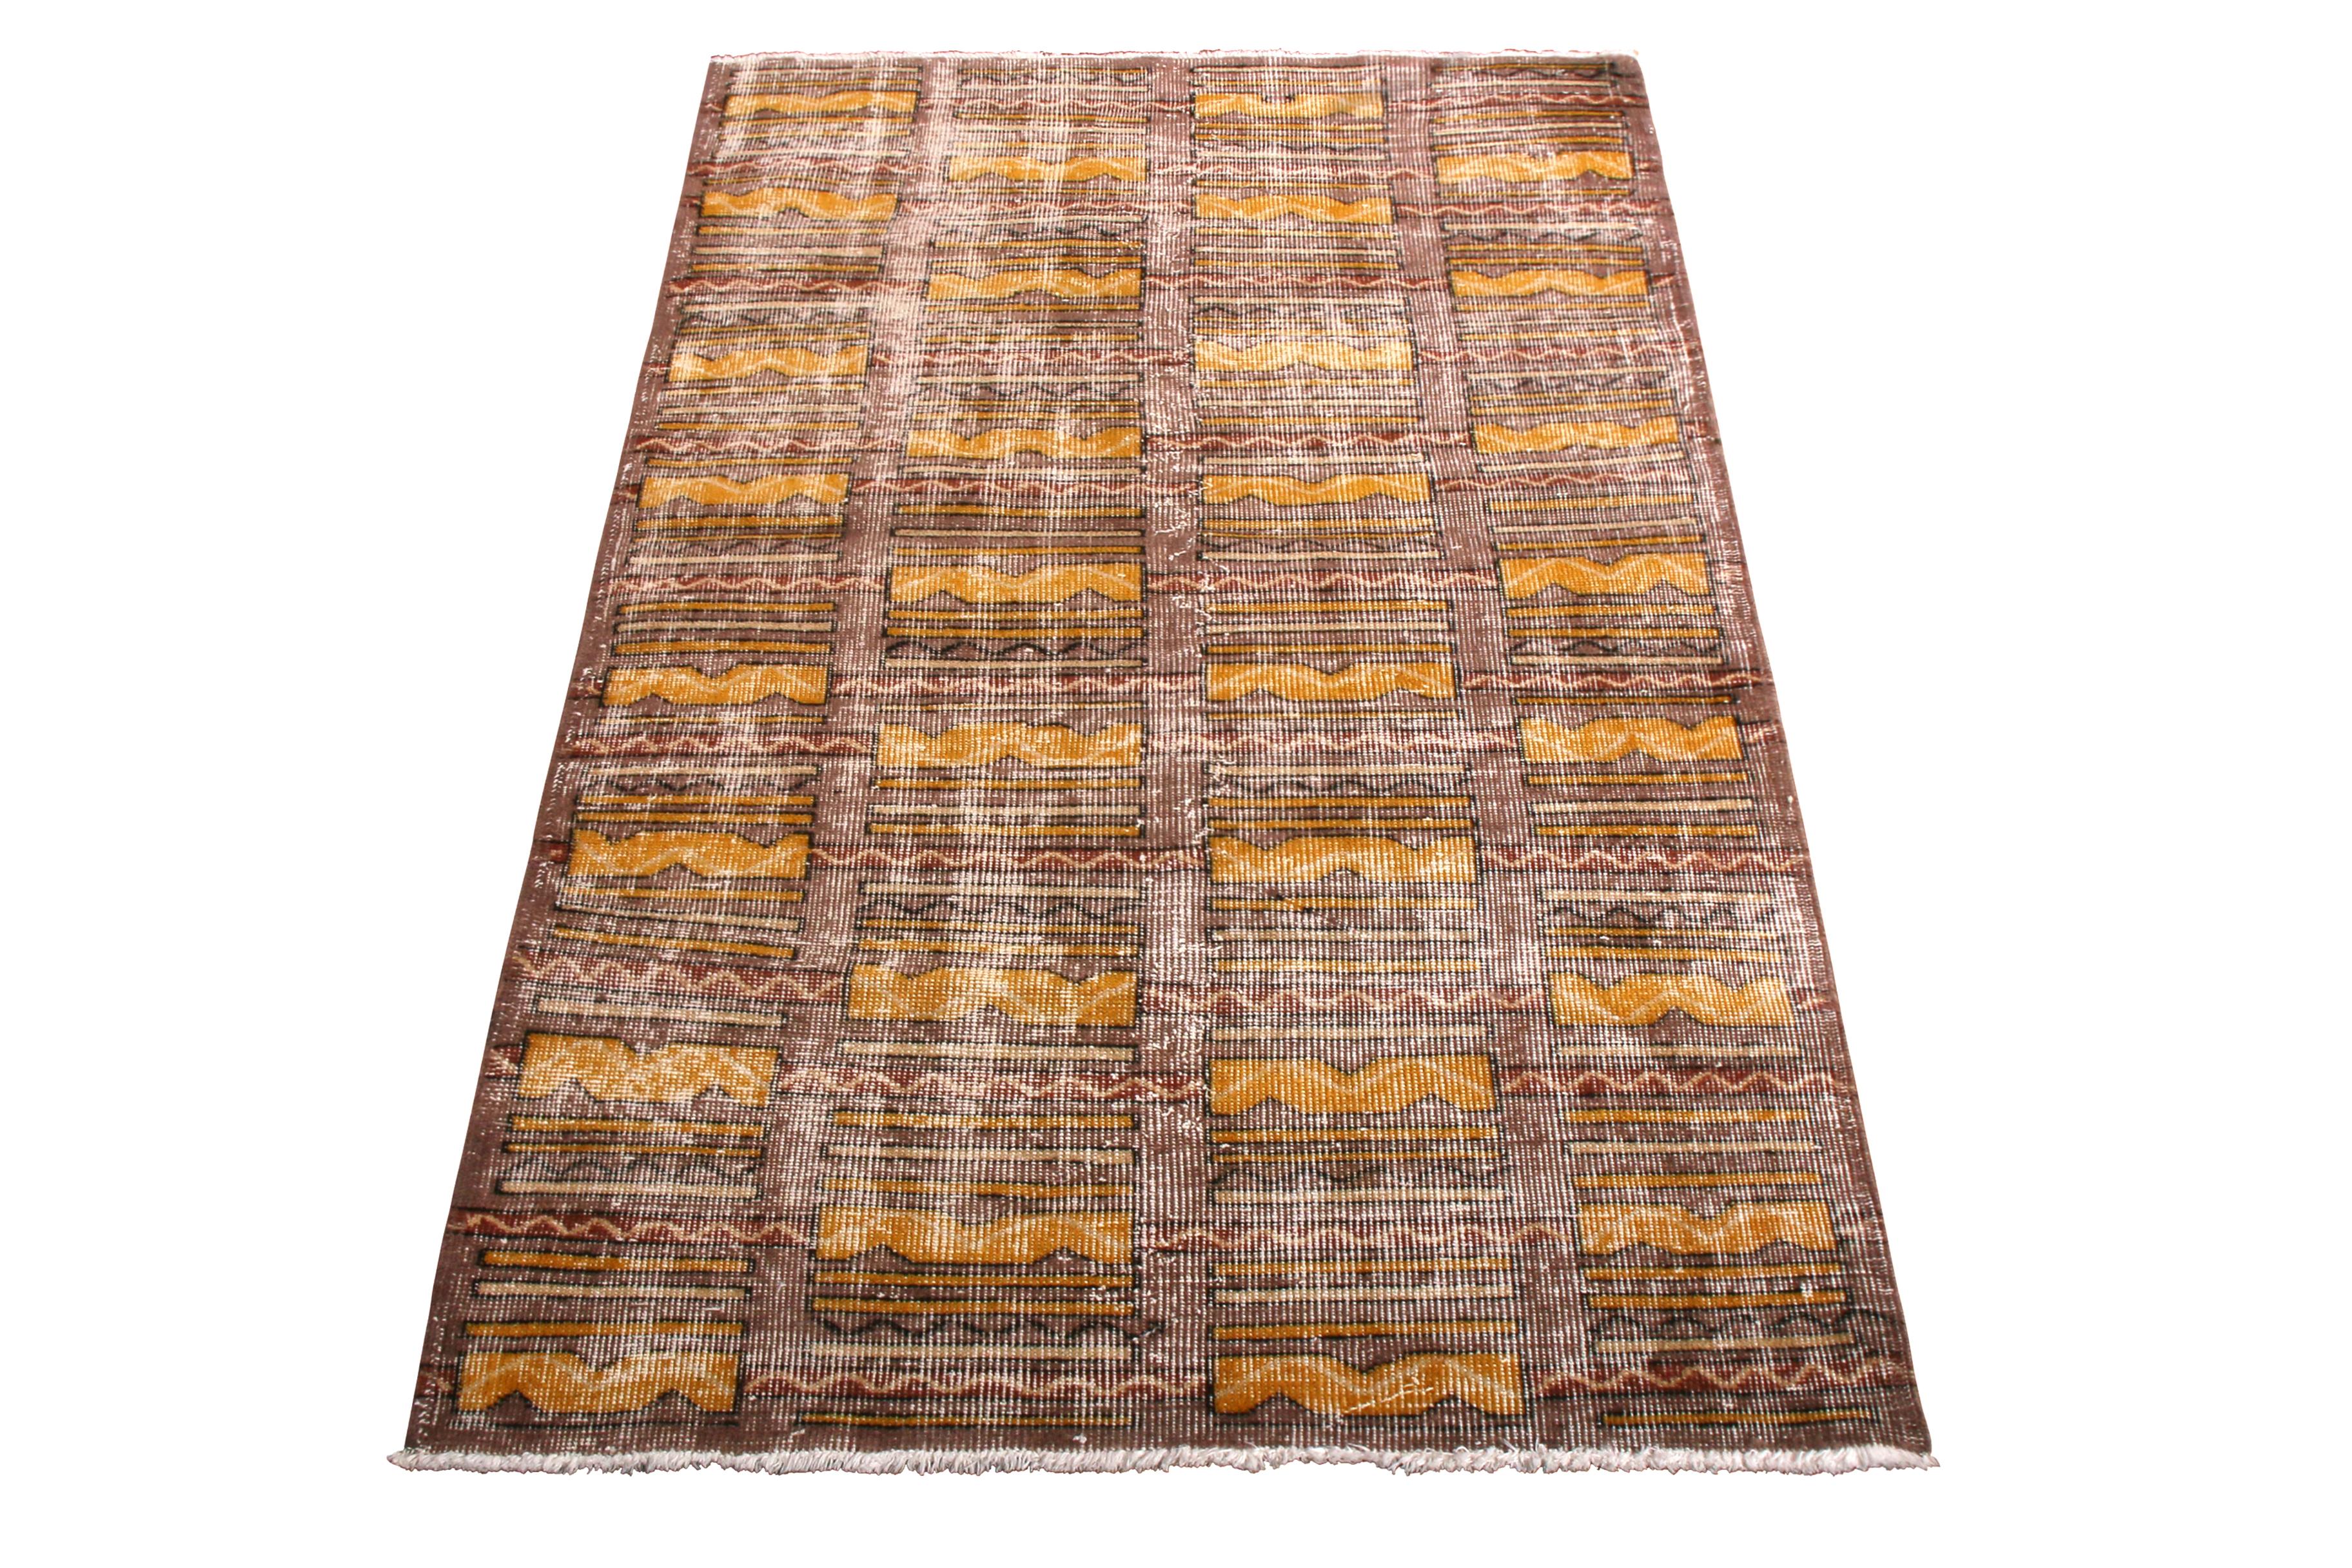 Hand knotted in Turkey originating between 1960-1970, this vintage mid-century wool rug is the latest to join our Midcentury Pasha collection, celebrating Turkish icon and multidisciplinary designer Zeki Müren with our team’s handpicked favorites